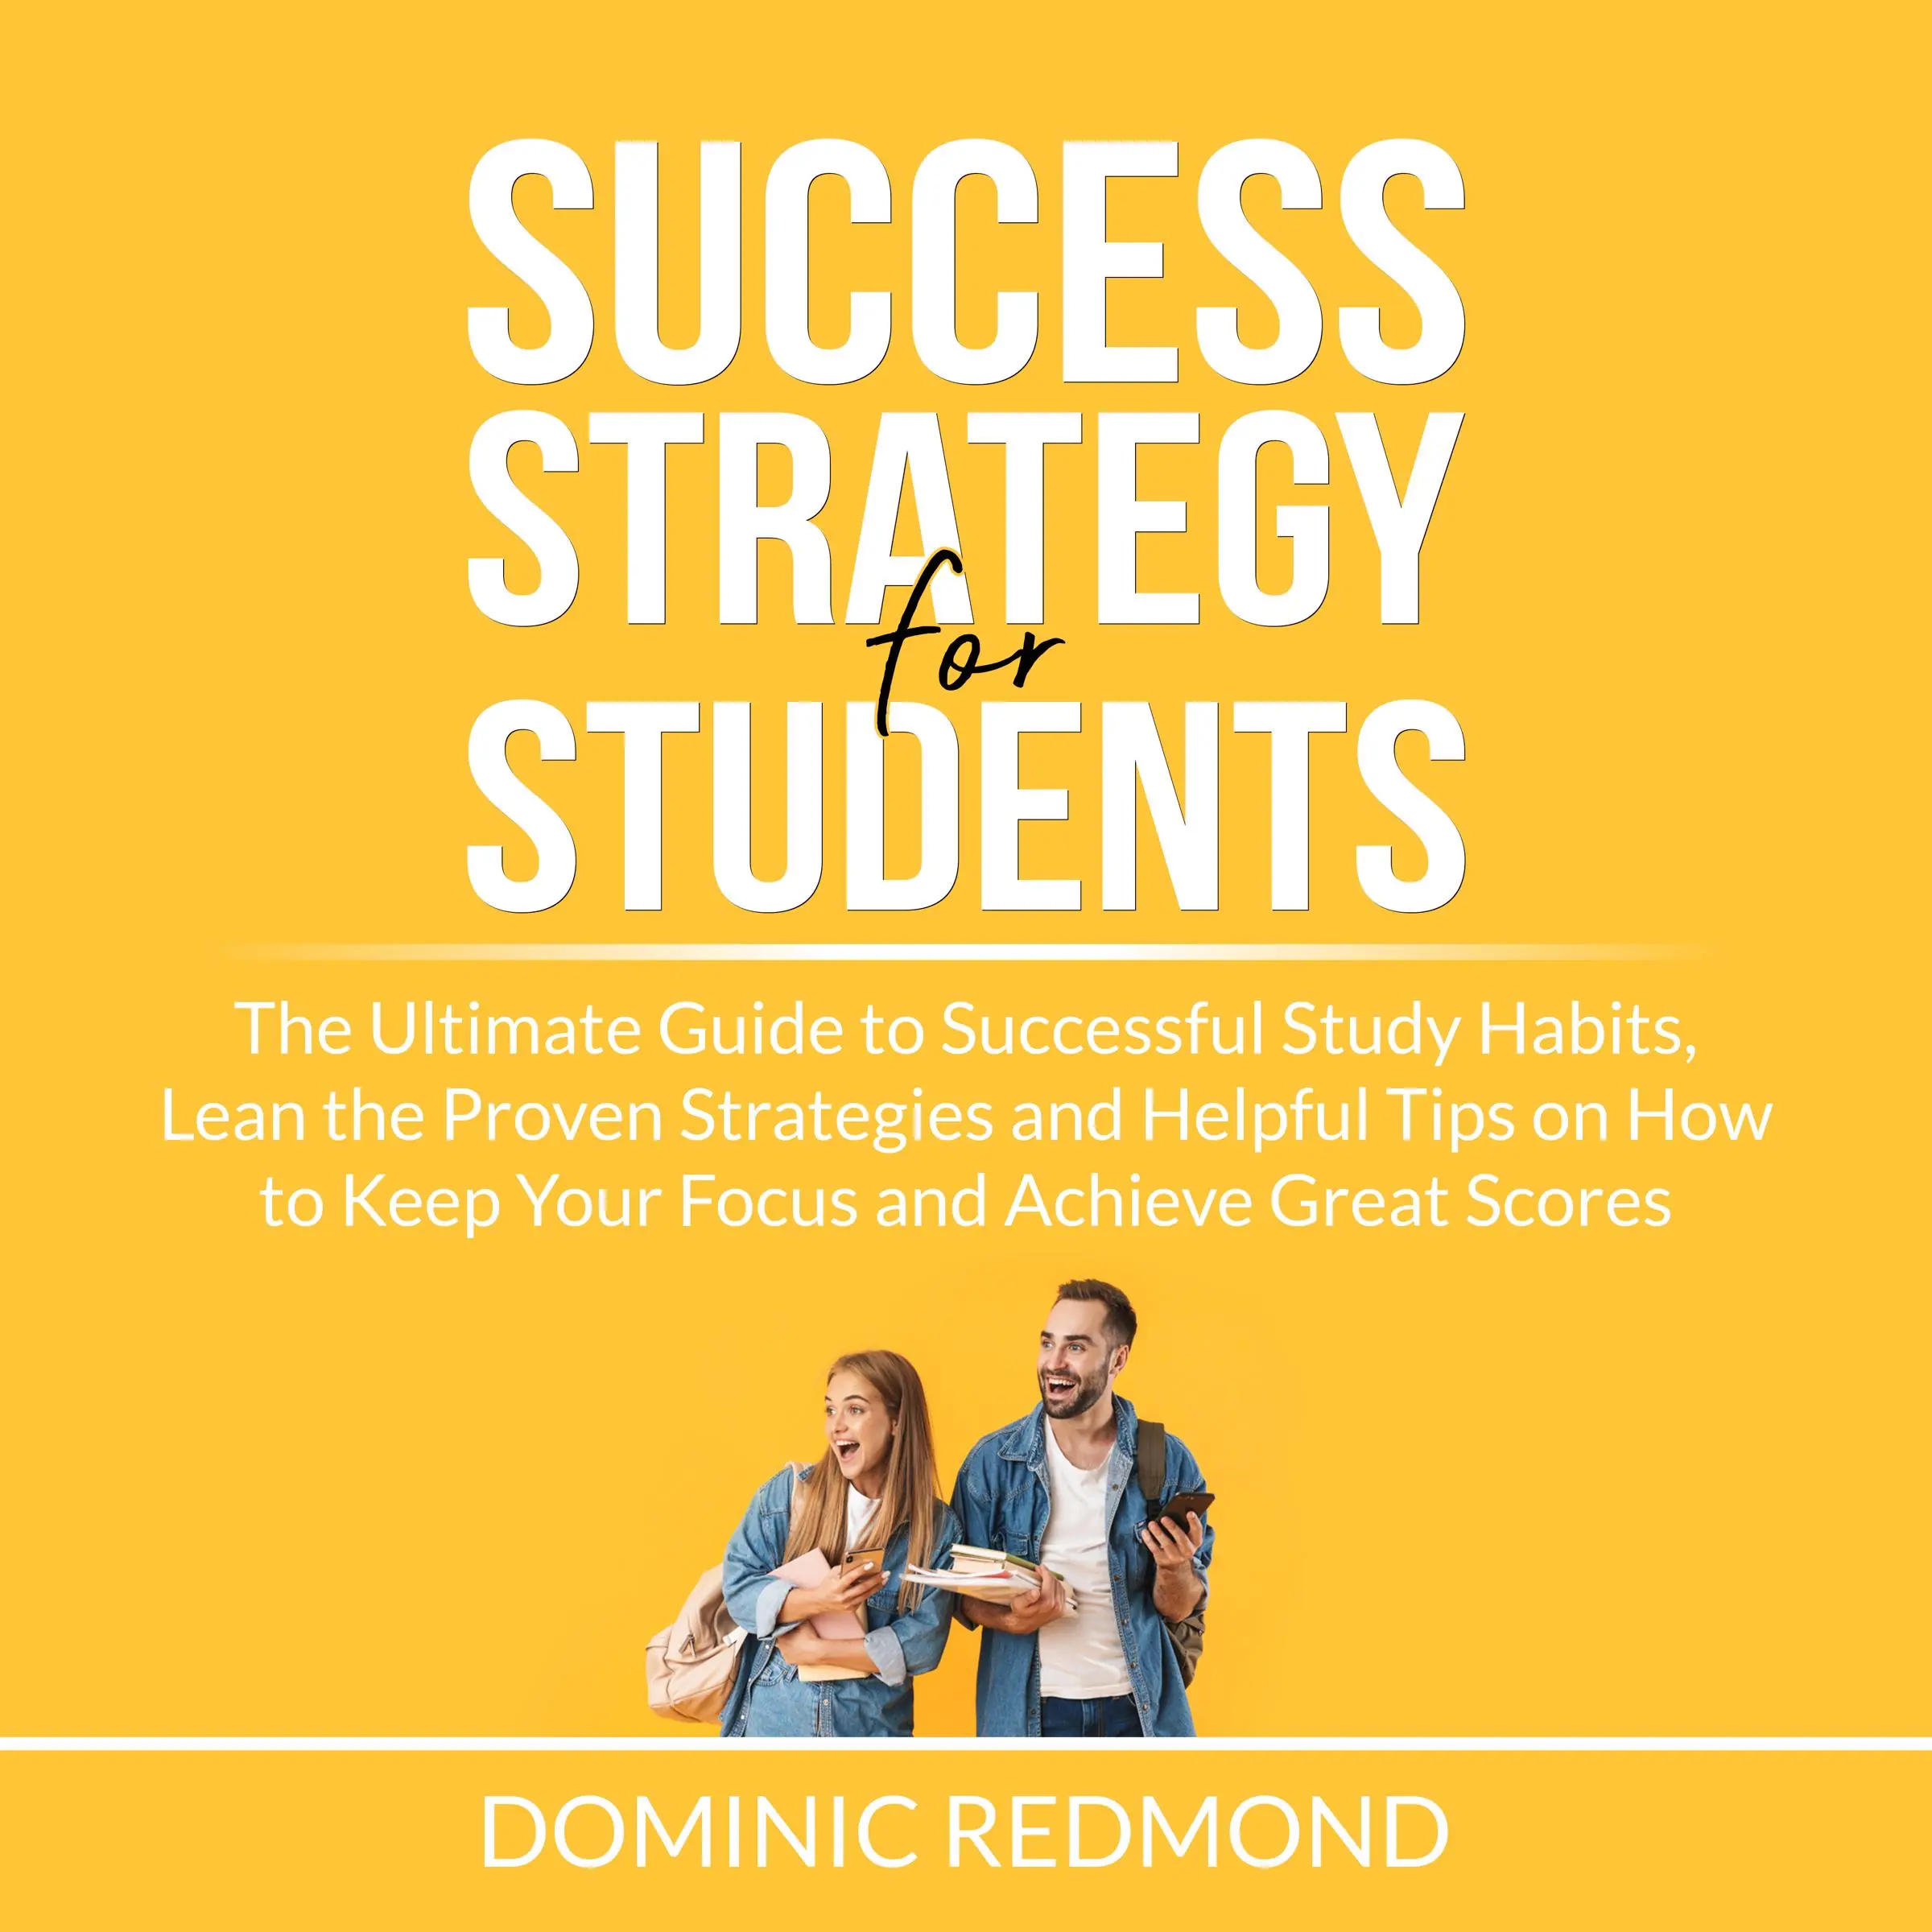 Success Strategy for Students: The Ultimate Guide to Successful Study Habits, Lean the Proven Strategies and Helpful Tips on How to Keep Your Focus and Achieve Great Scores Audiobook by Dominic Redmond